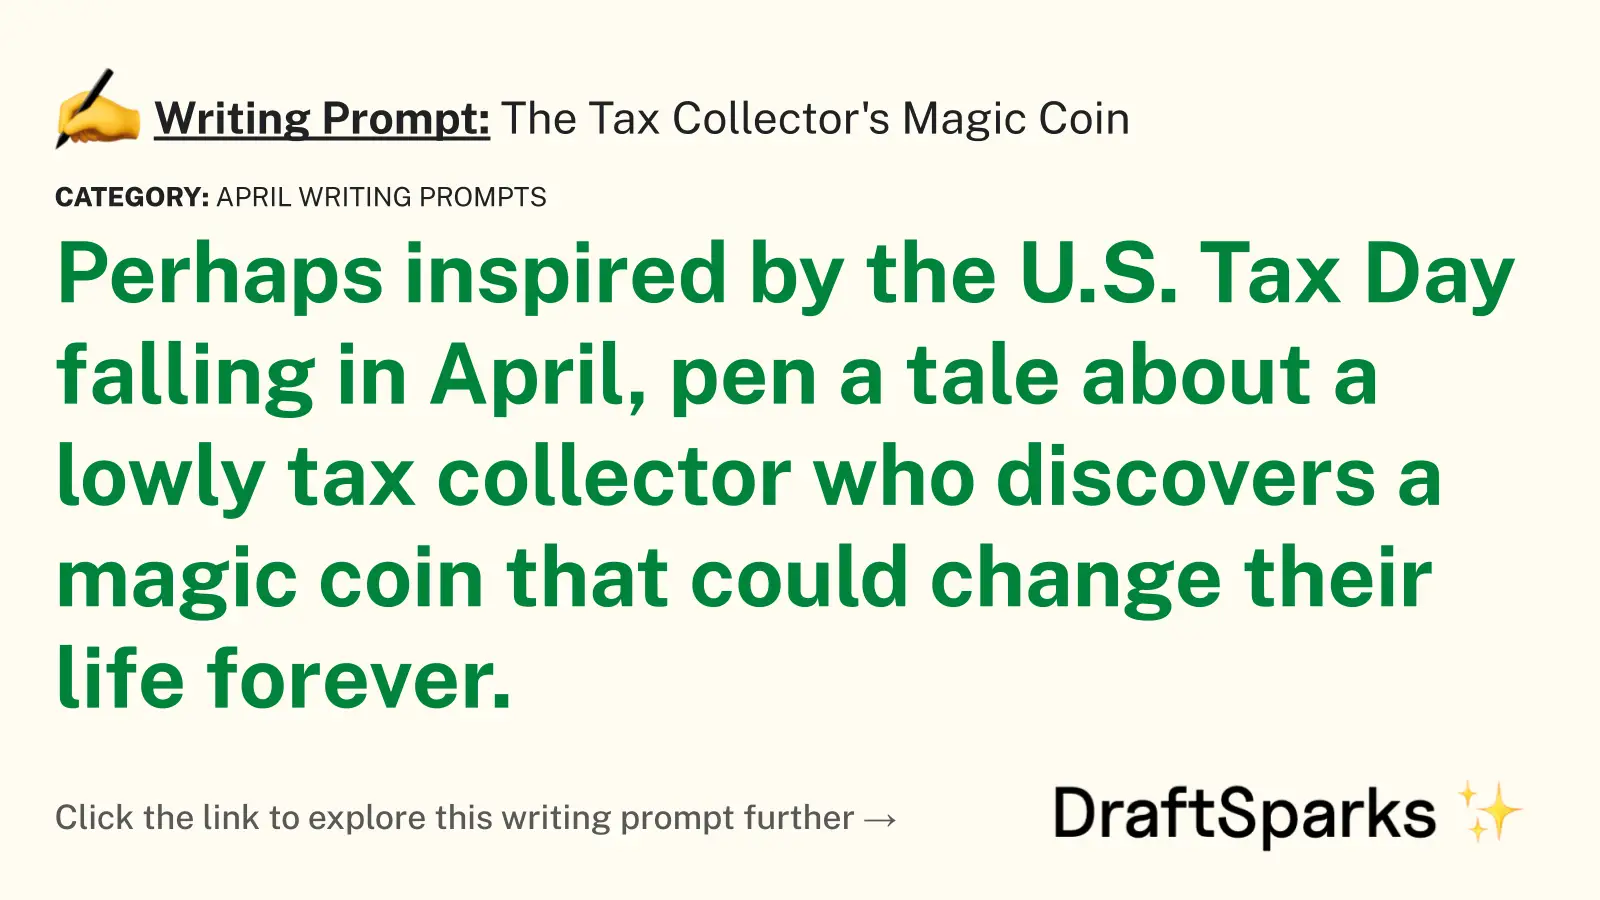 The Tax Collector’s Magic Coin